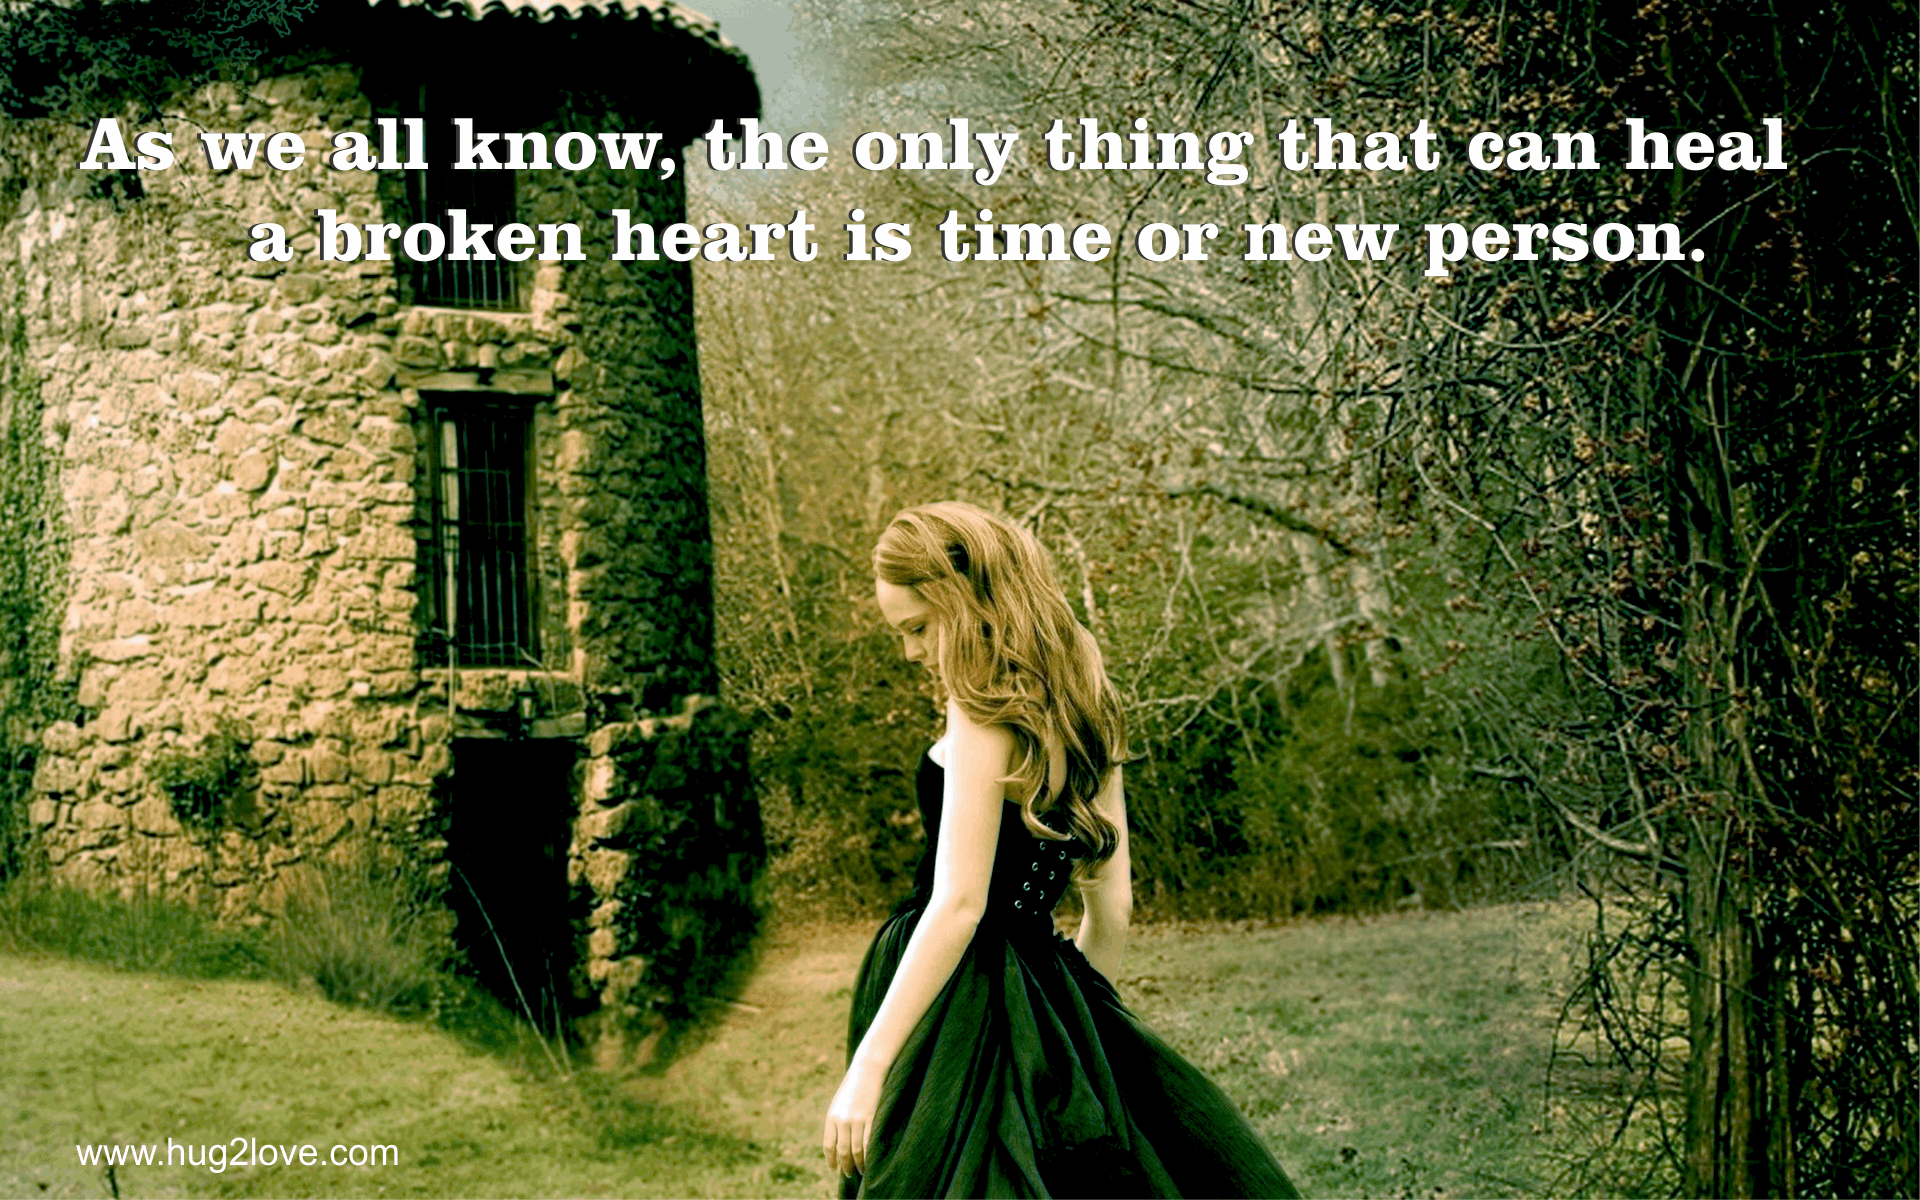 Broken Heart With Quotes Wallpapers